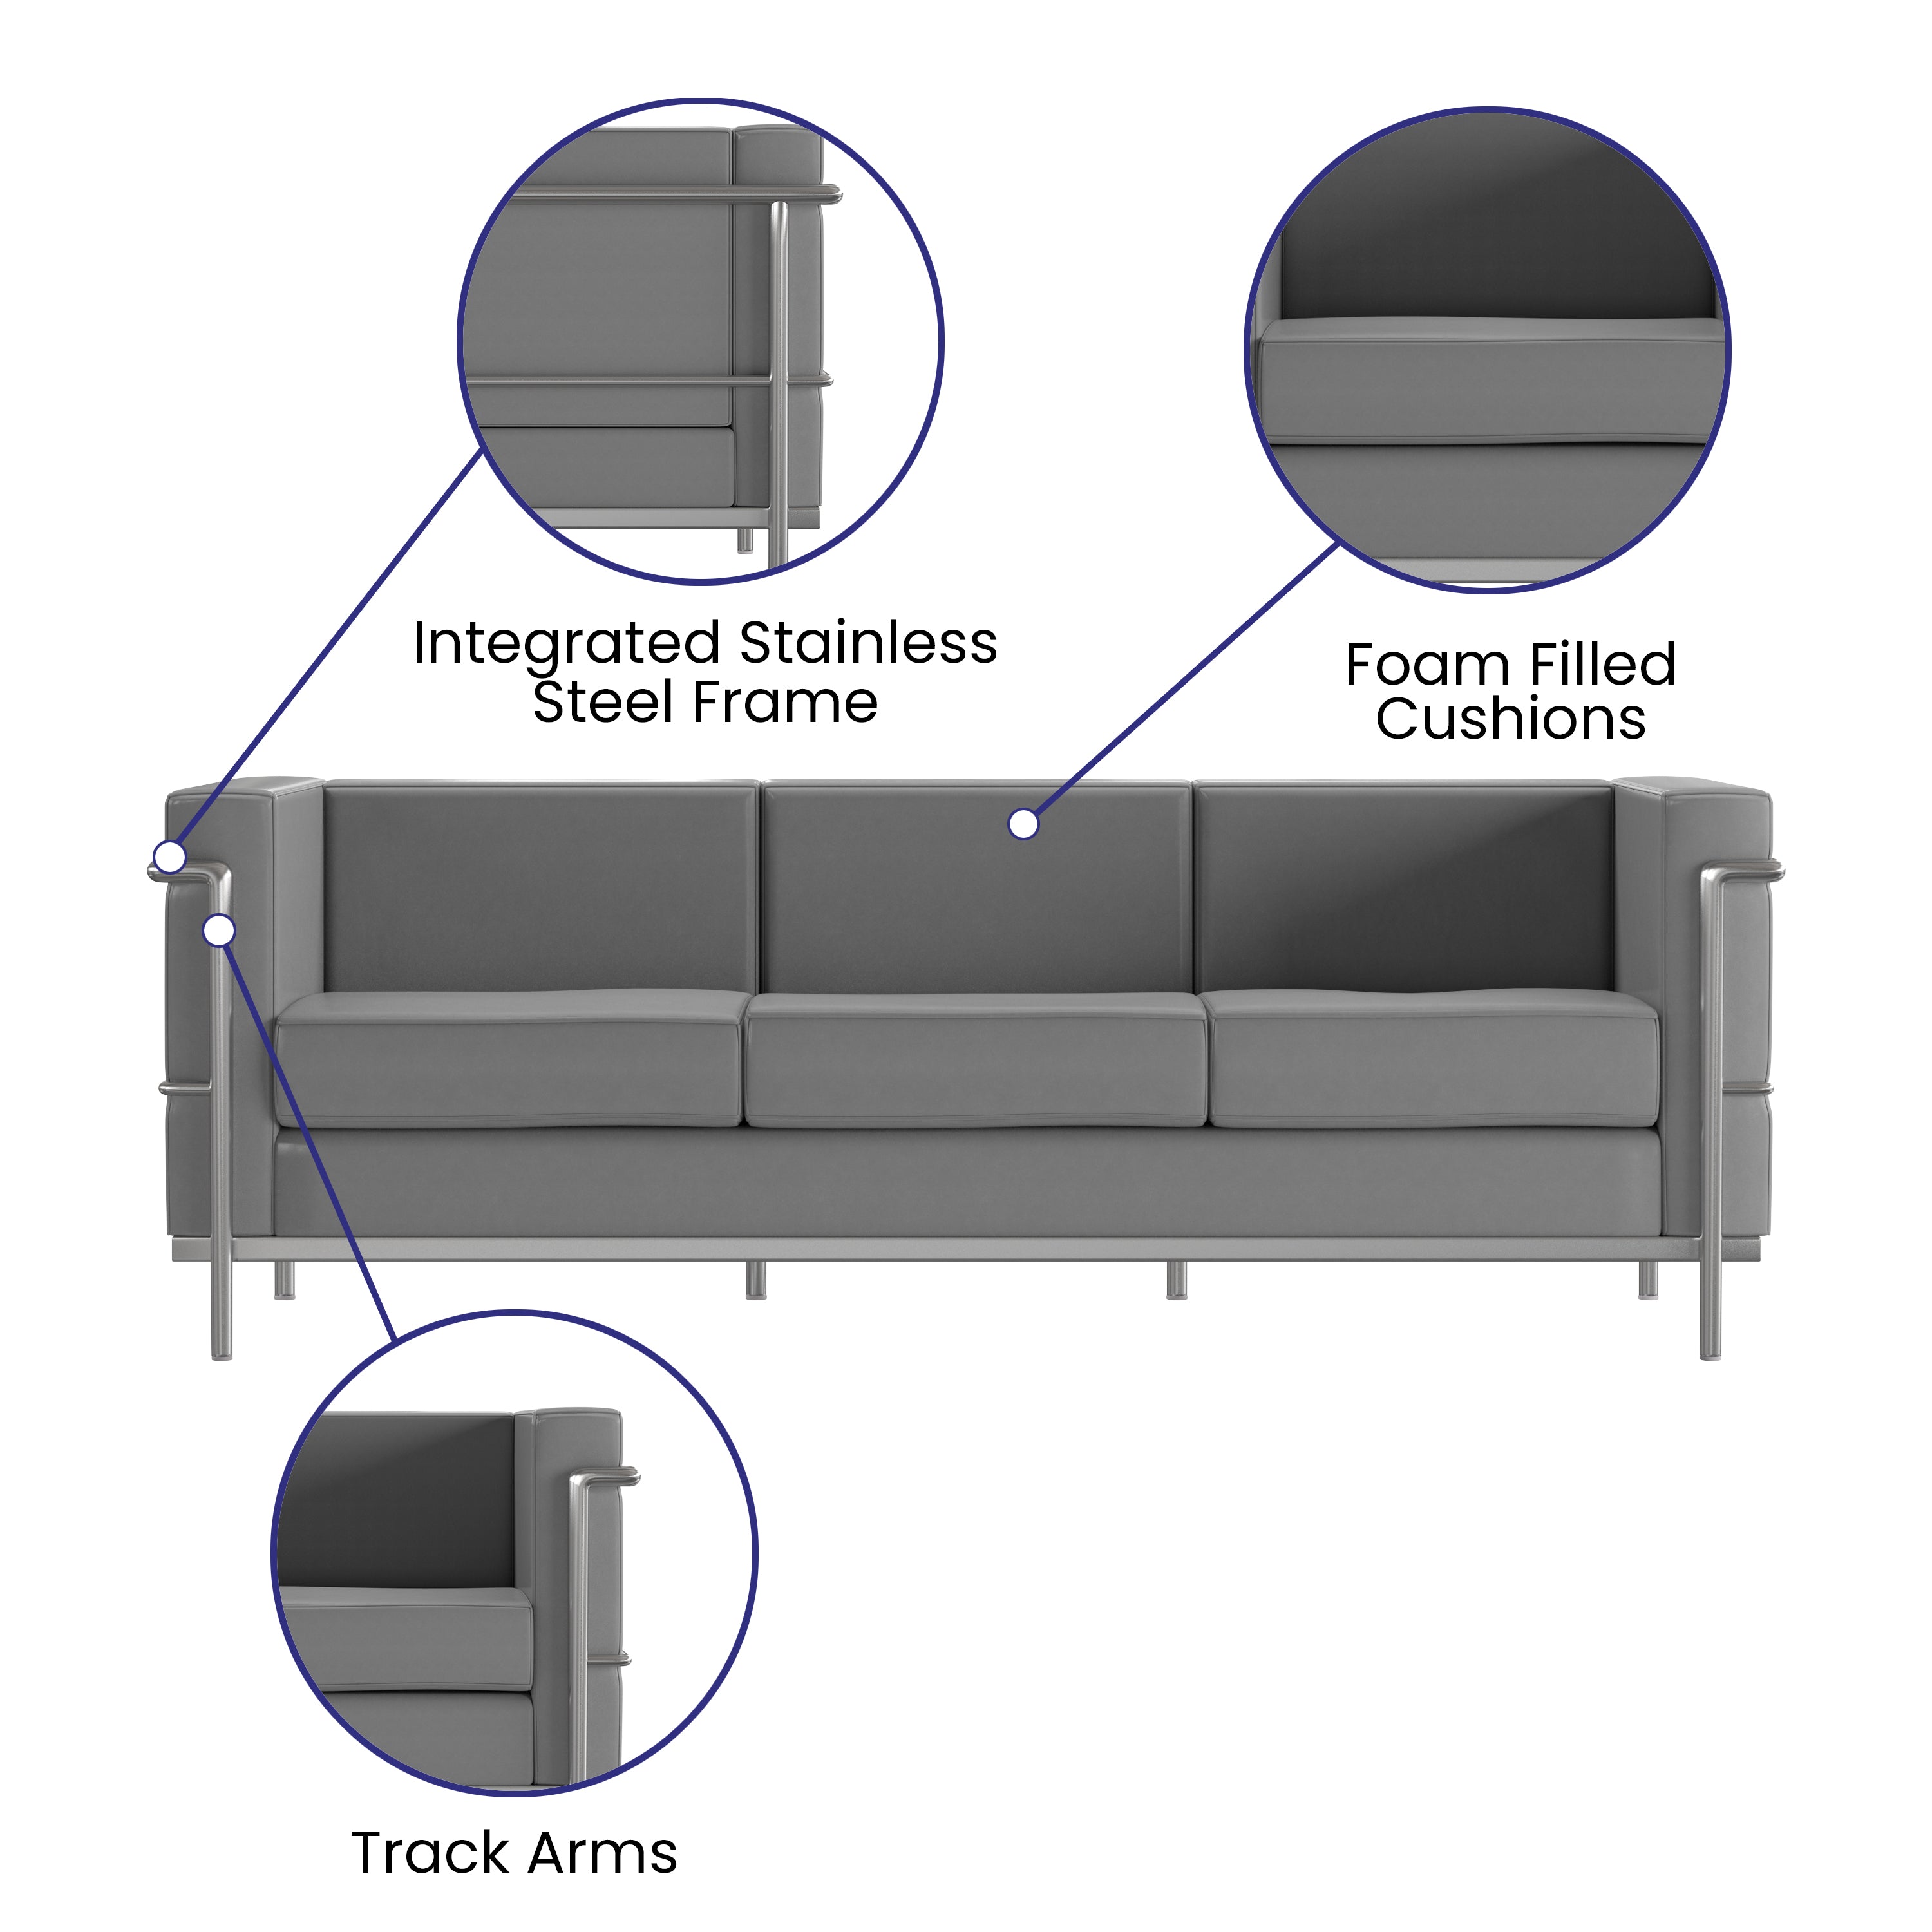 Hercules Regal Series Contemporary LeatherSoft Sofa with Encasing Frame-Reception Sofa-Flash Furniture-Wall2Wall Furnishings